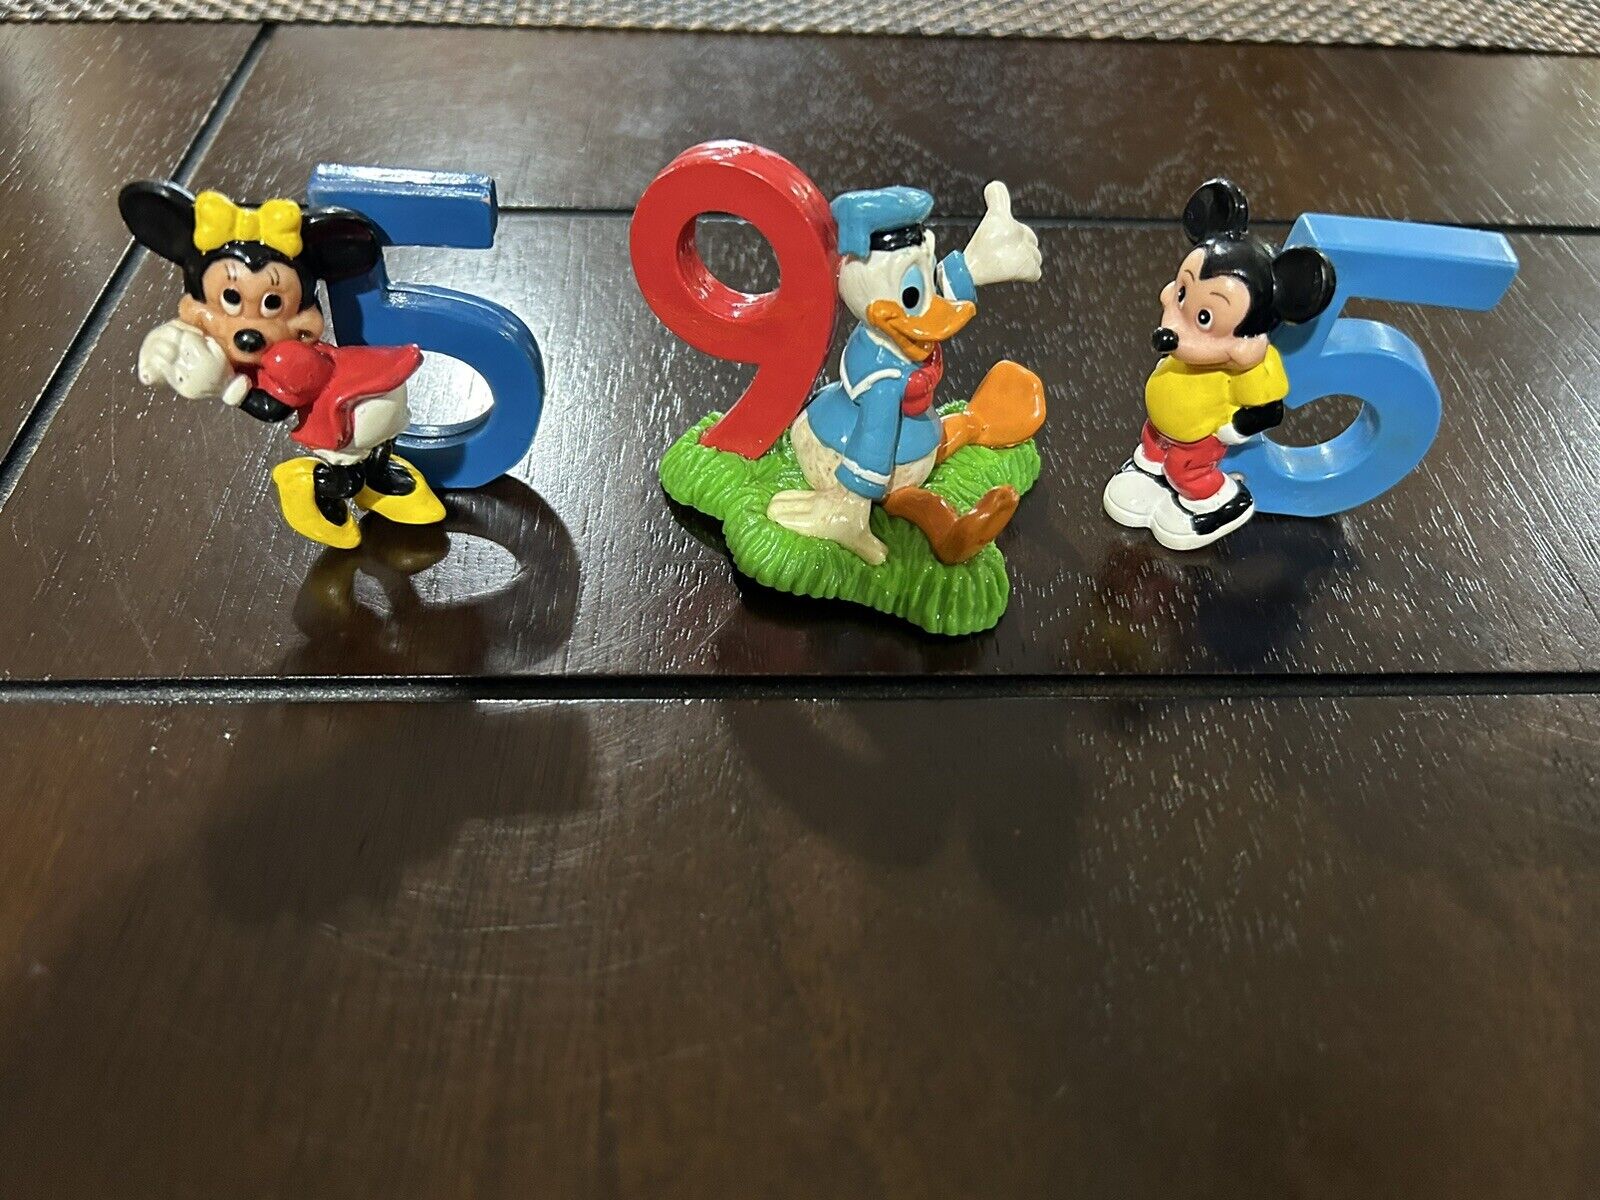 Vintage Mickey Mouse Minnie Donald Duck Applause PVC Birthday Cake Topper Age 